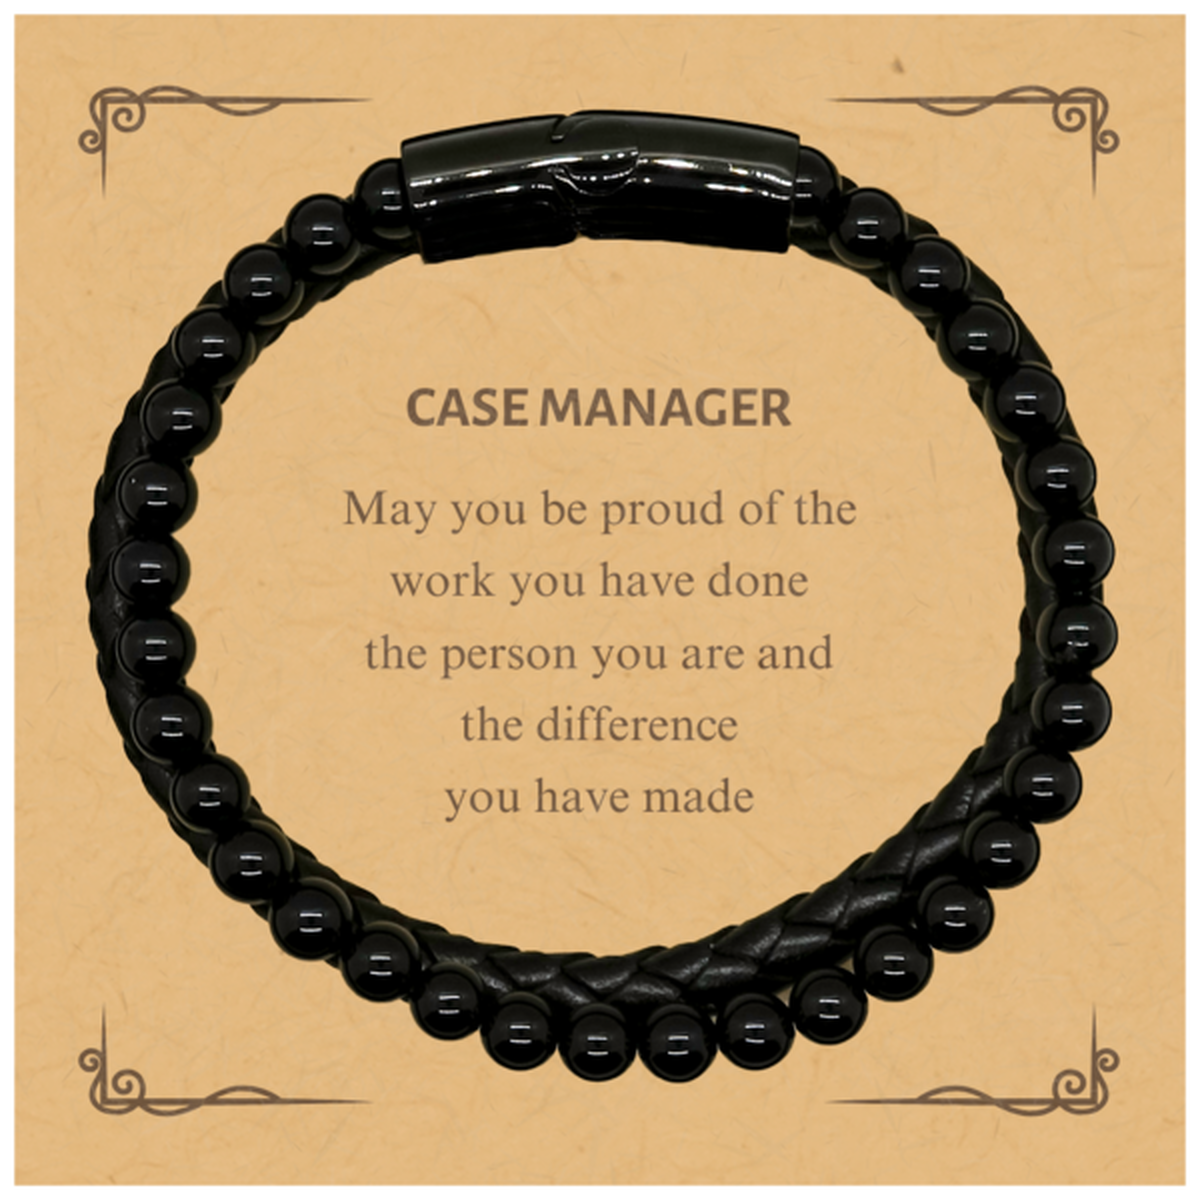 Case Manager May you be proud of the work you have done, Retirement Case Manager Stone Leather Bracelets for Colleague Appreciation Gifts Amazing for Case Manager